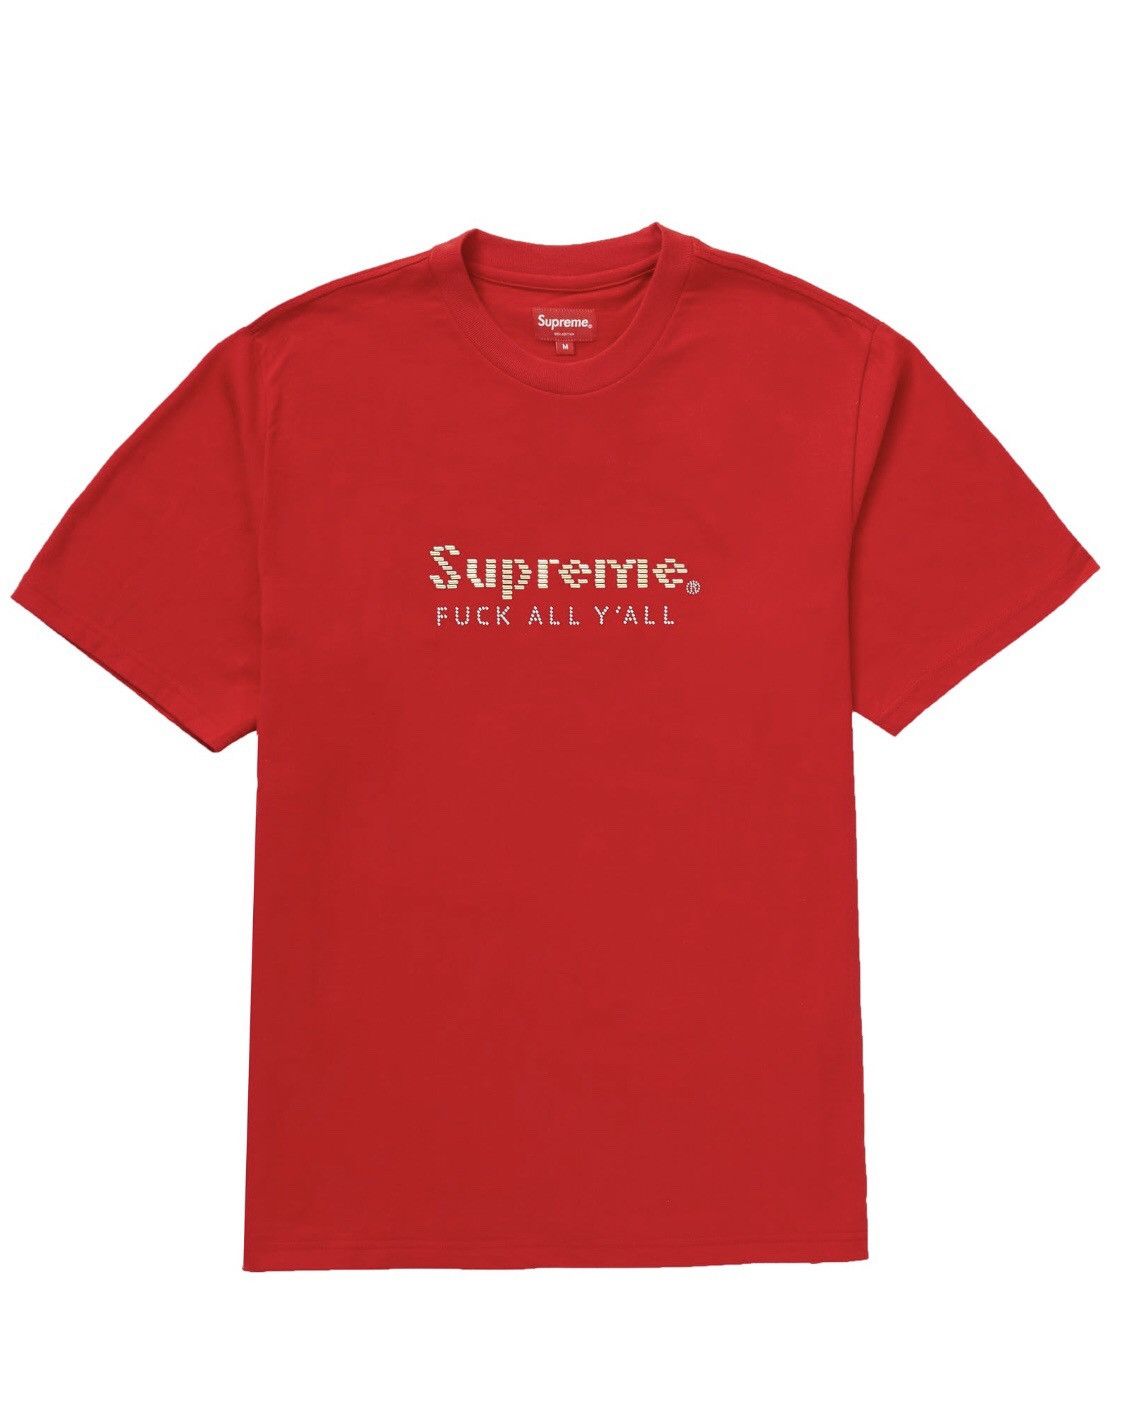 Supreme Fuck Y'all T-Shirt Red – BAX AND THISTLE